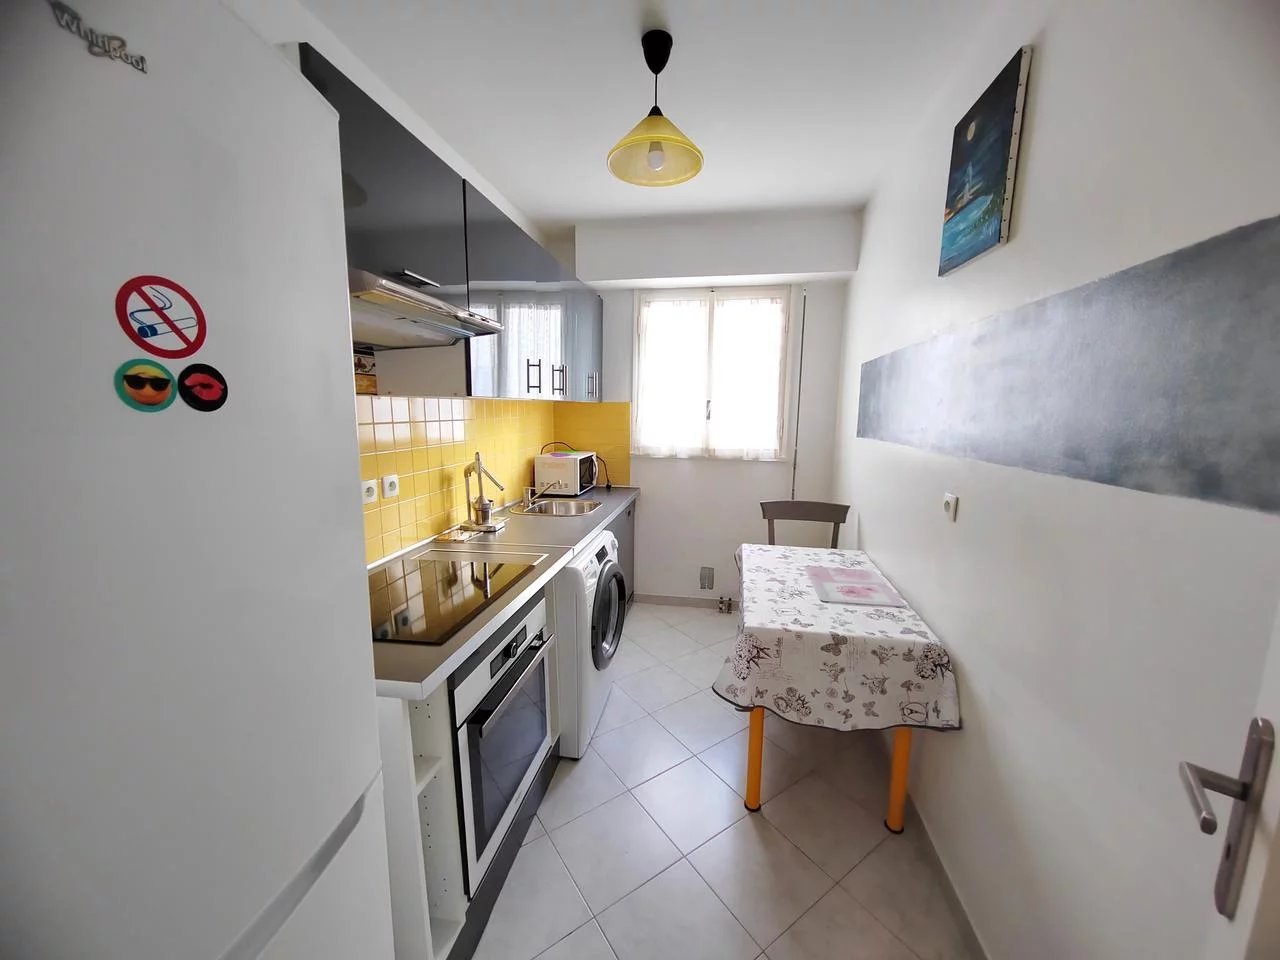 Appartement  2 Rooms 43.97m2  for sale   335 000 €